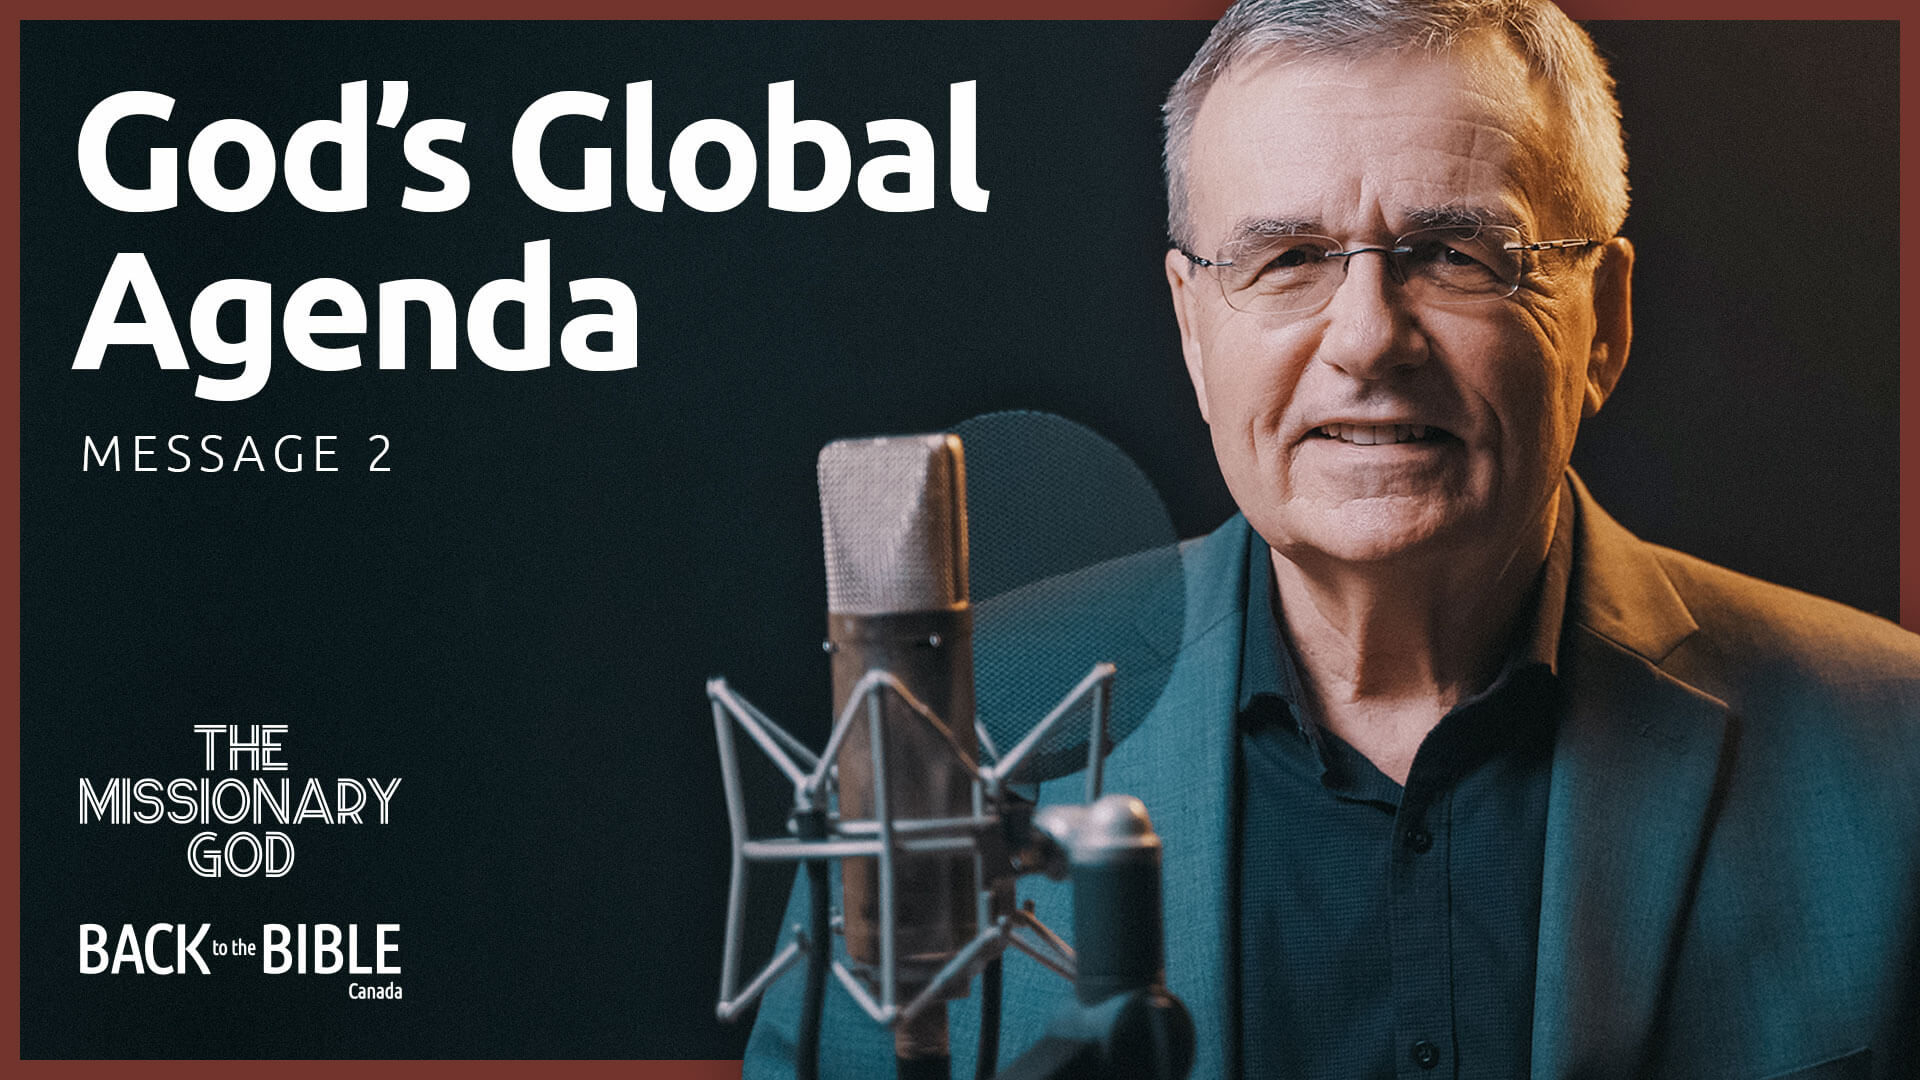 God's Global Agenda | Back to the Bible Canada with Dr. John Neufeld